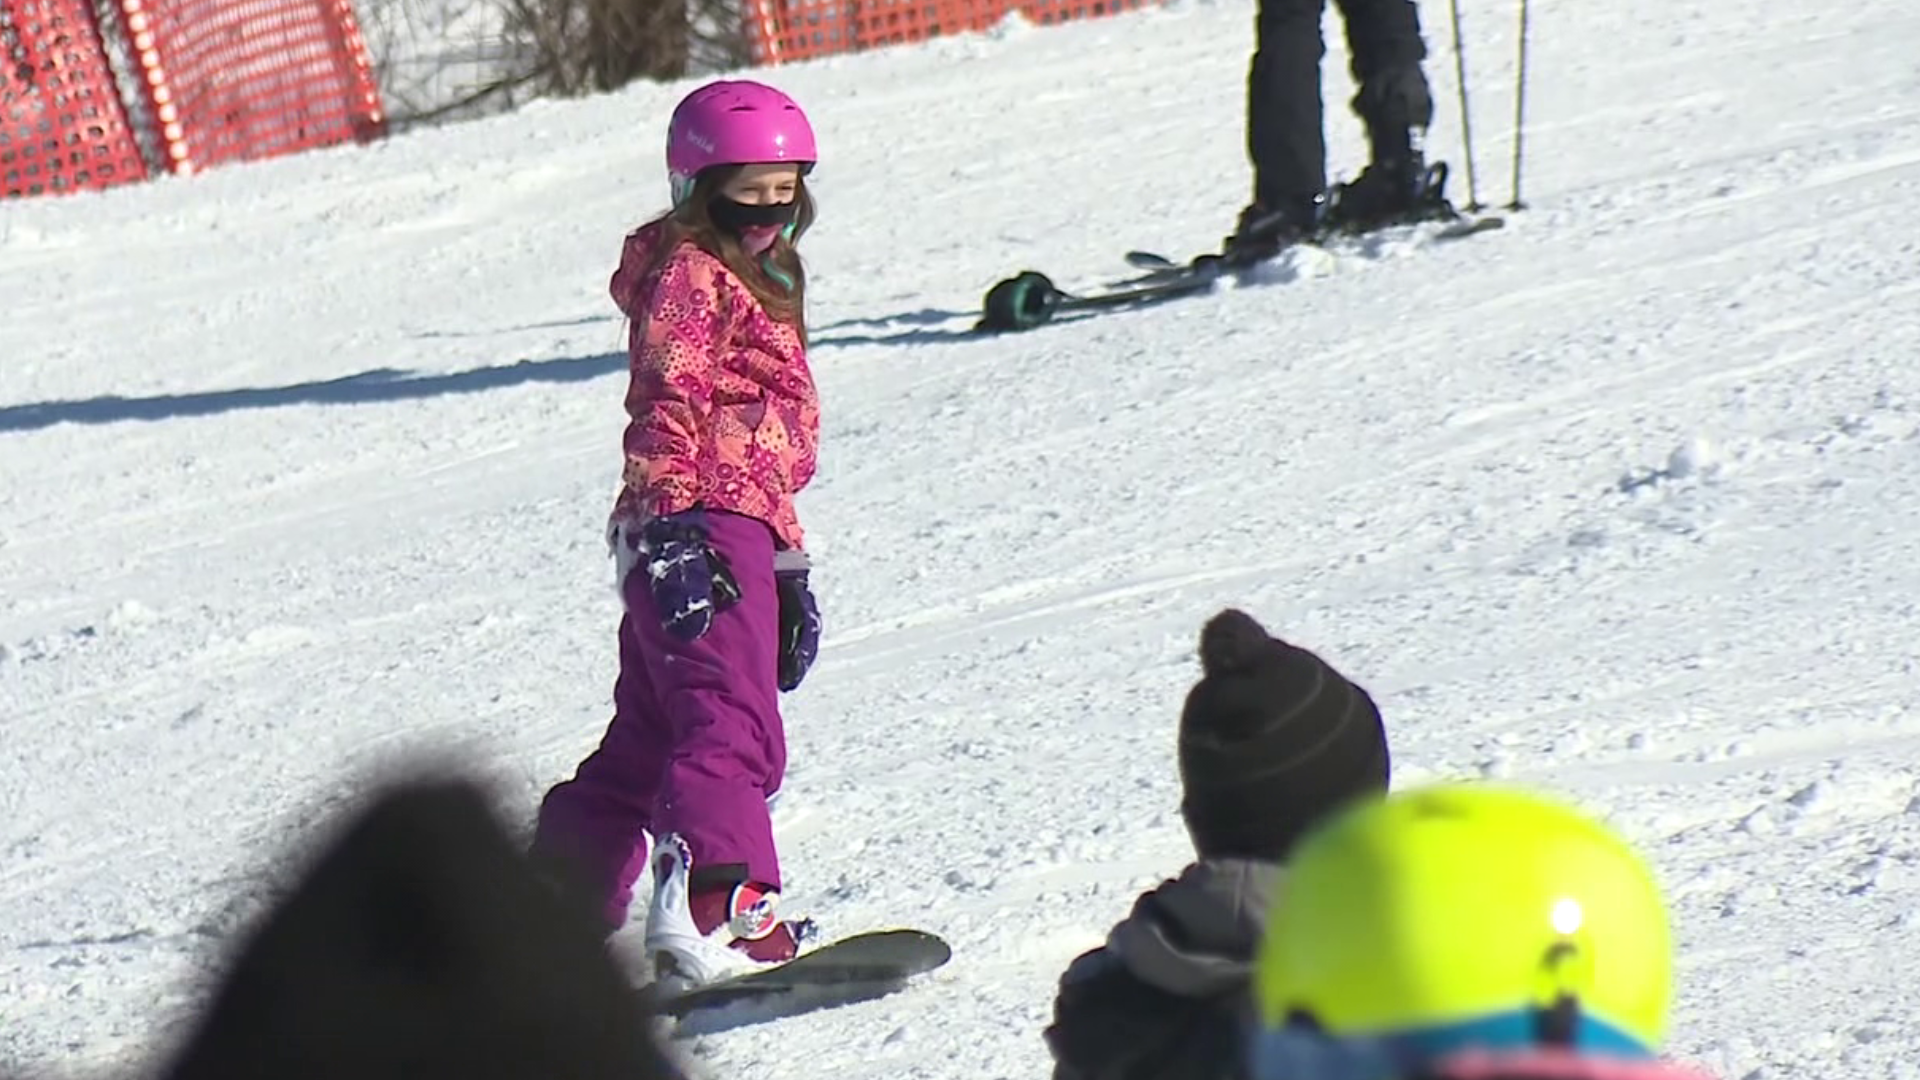 Shawnee Mountain Ski Area hosted their annual "Paint the Mountain Pink" event for breast cancer awareness.